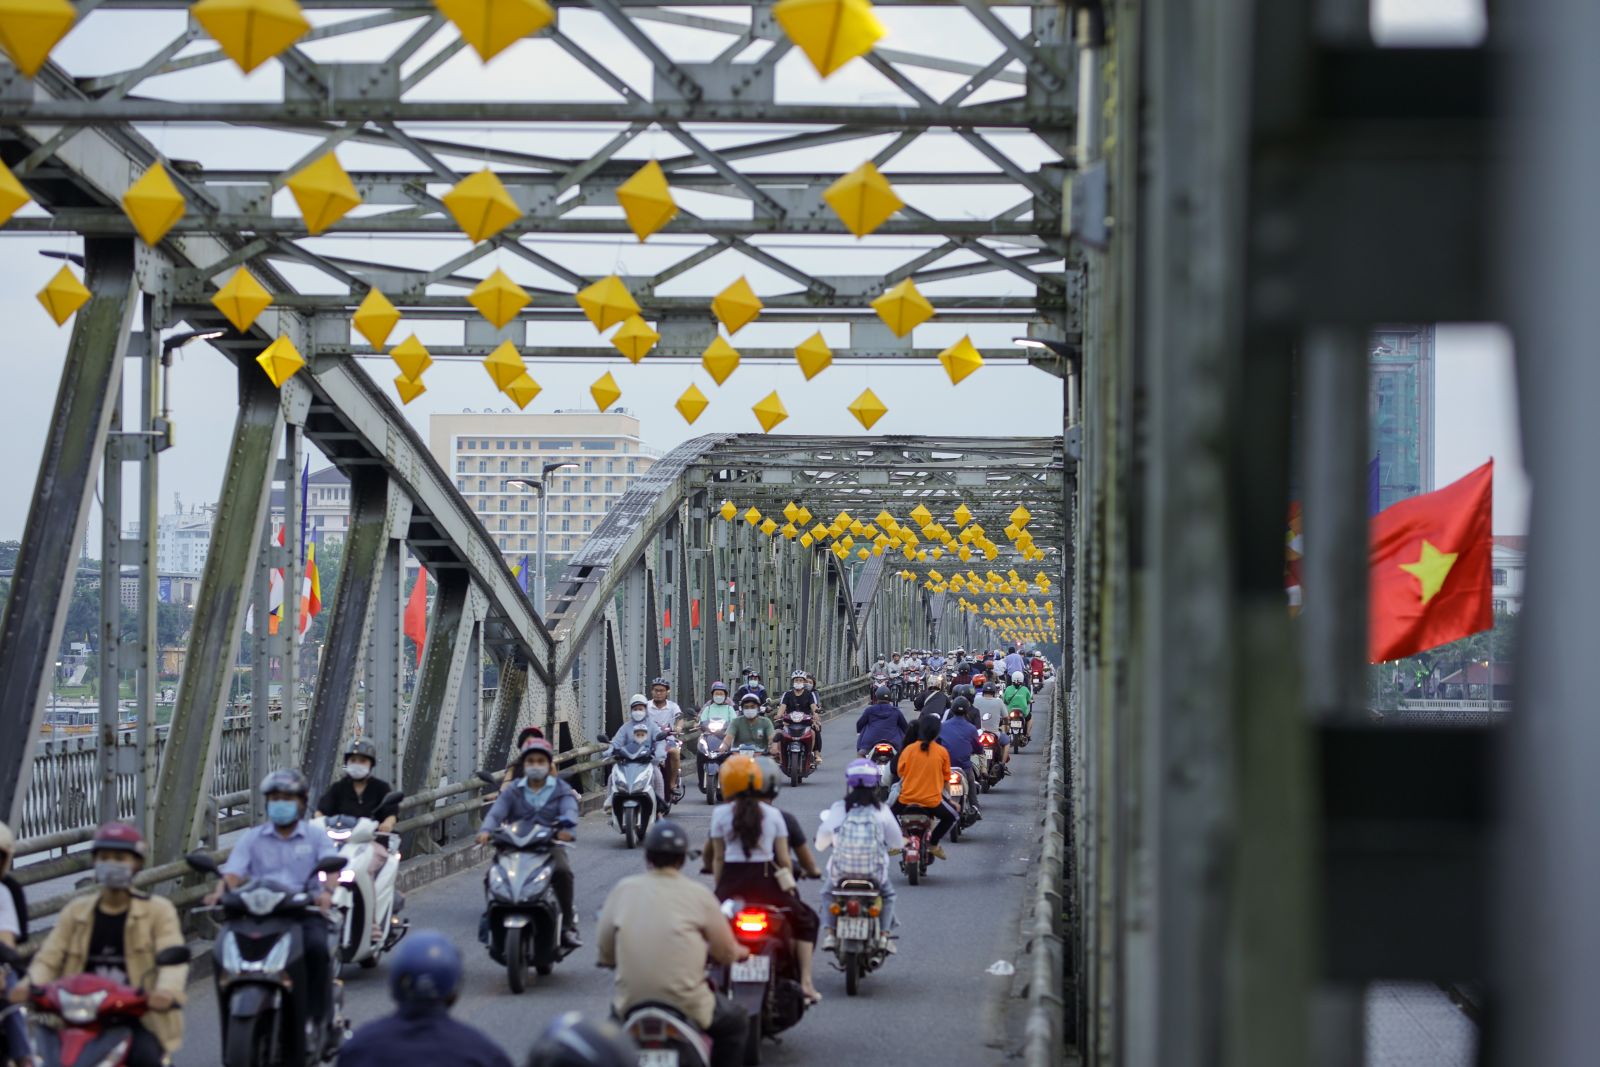 Truong Tien Bridge becomes more lively with lanterns